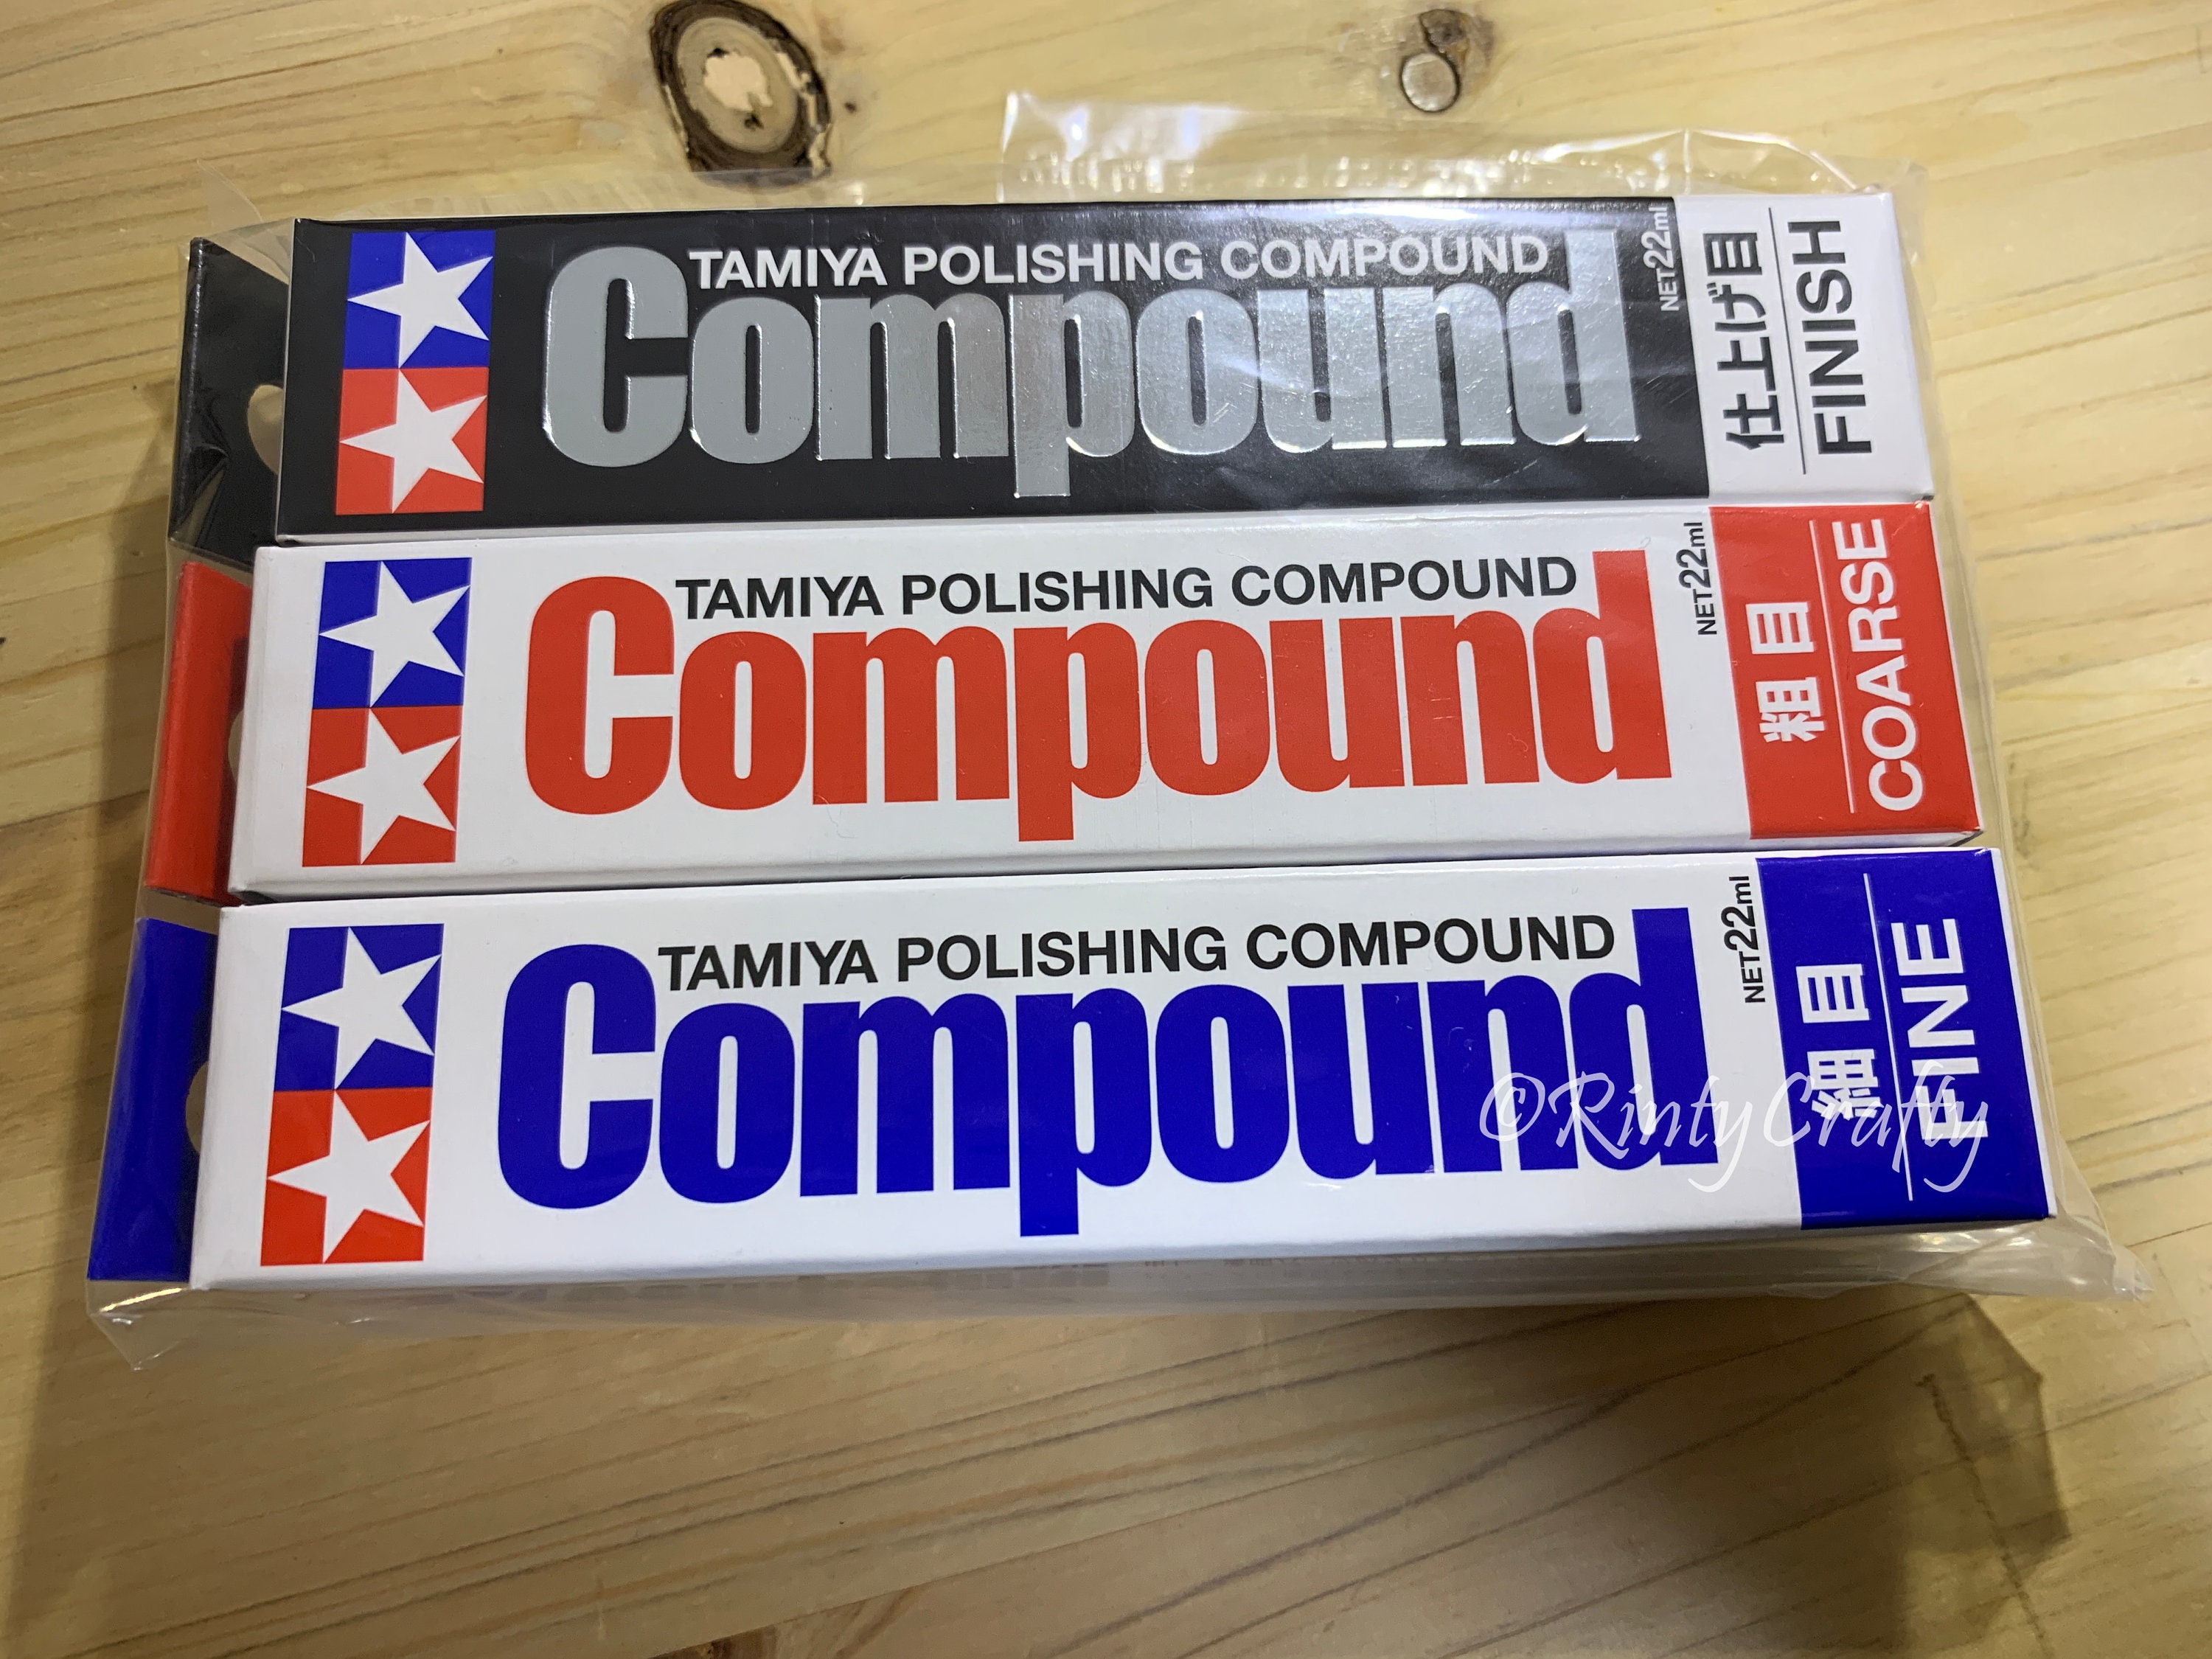 How to polish plastic - with Tamiya compounds 